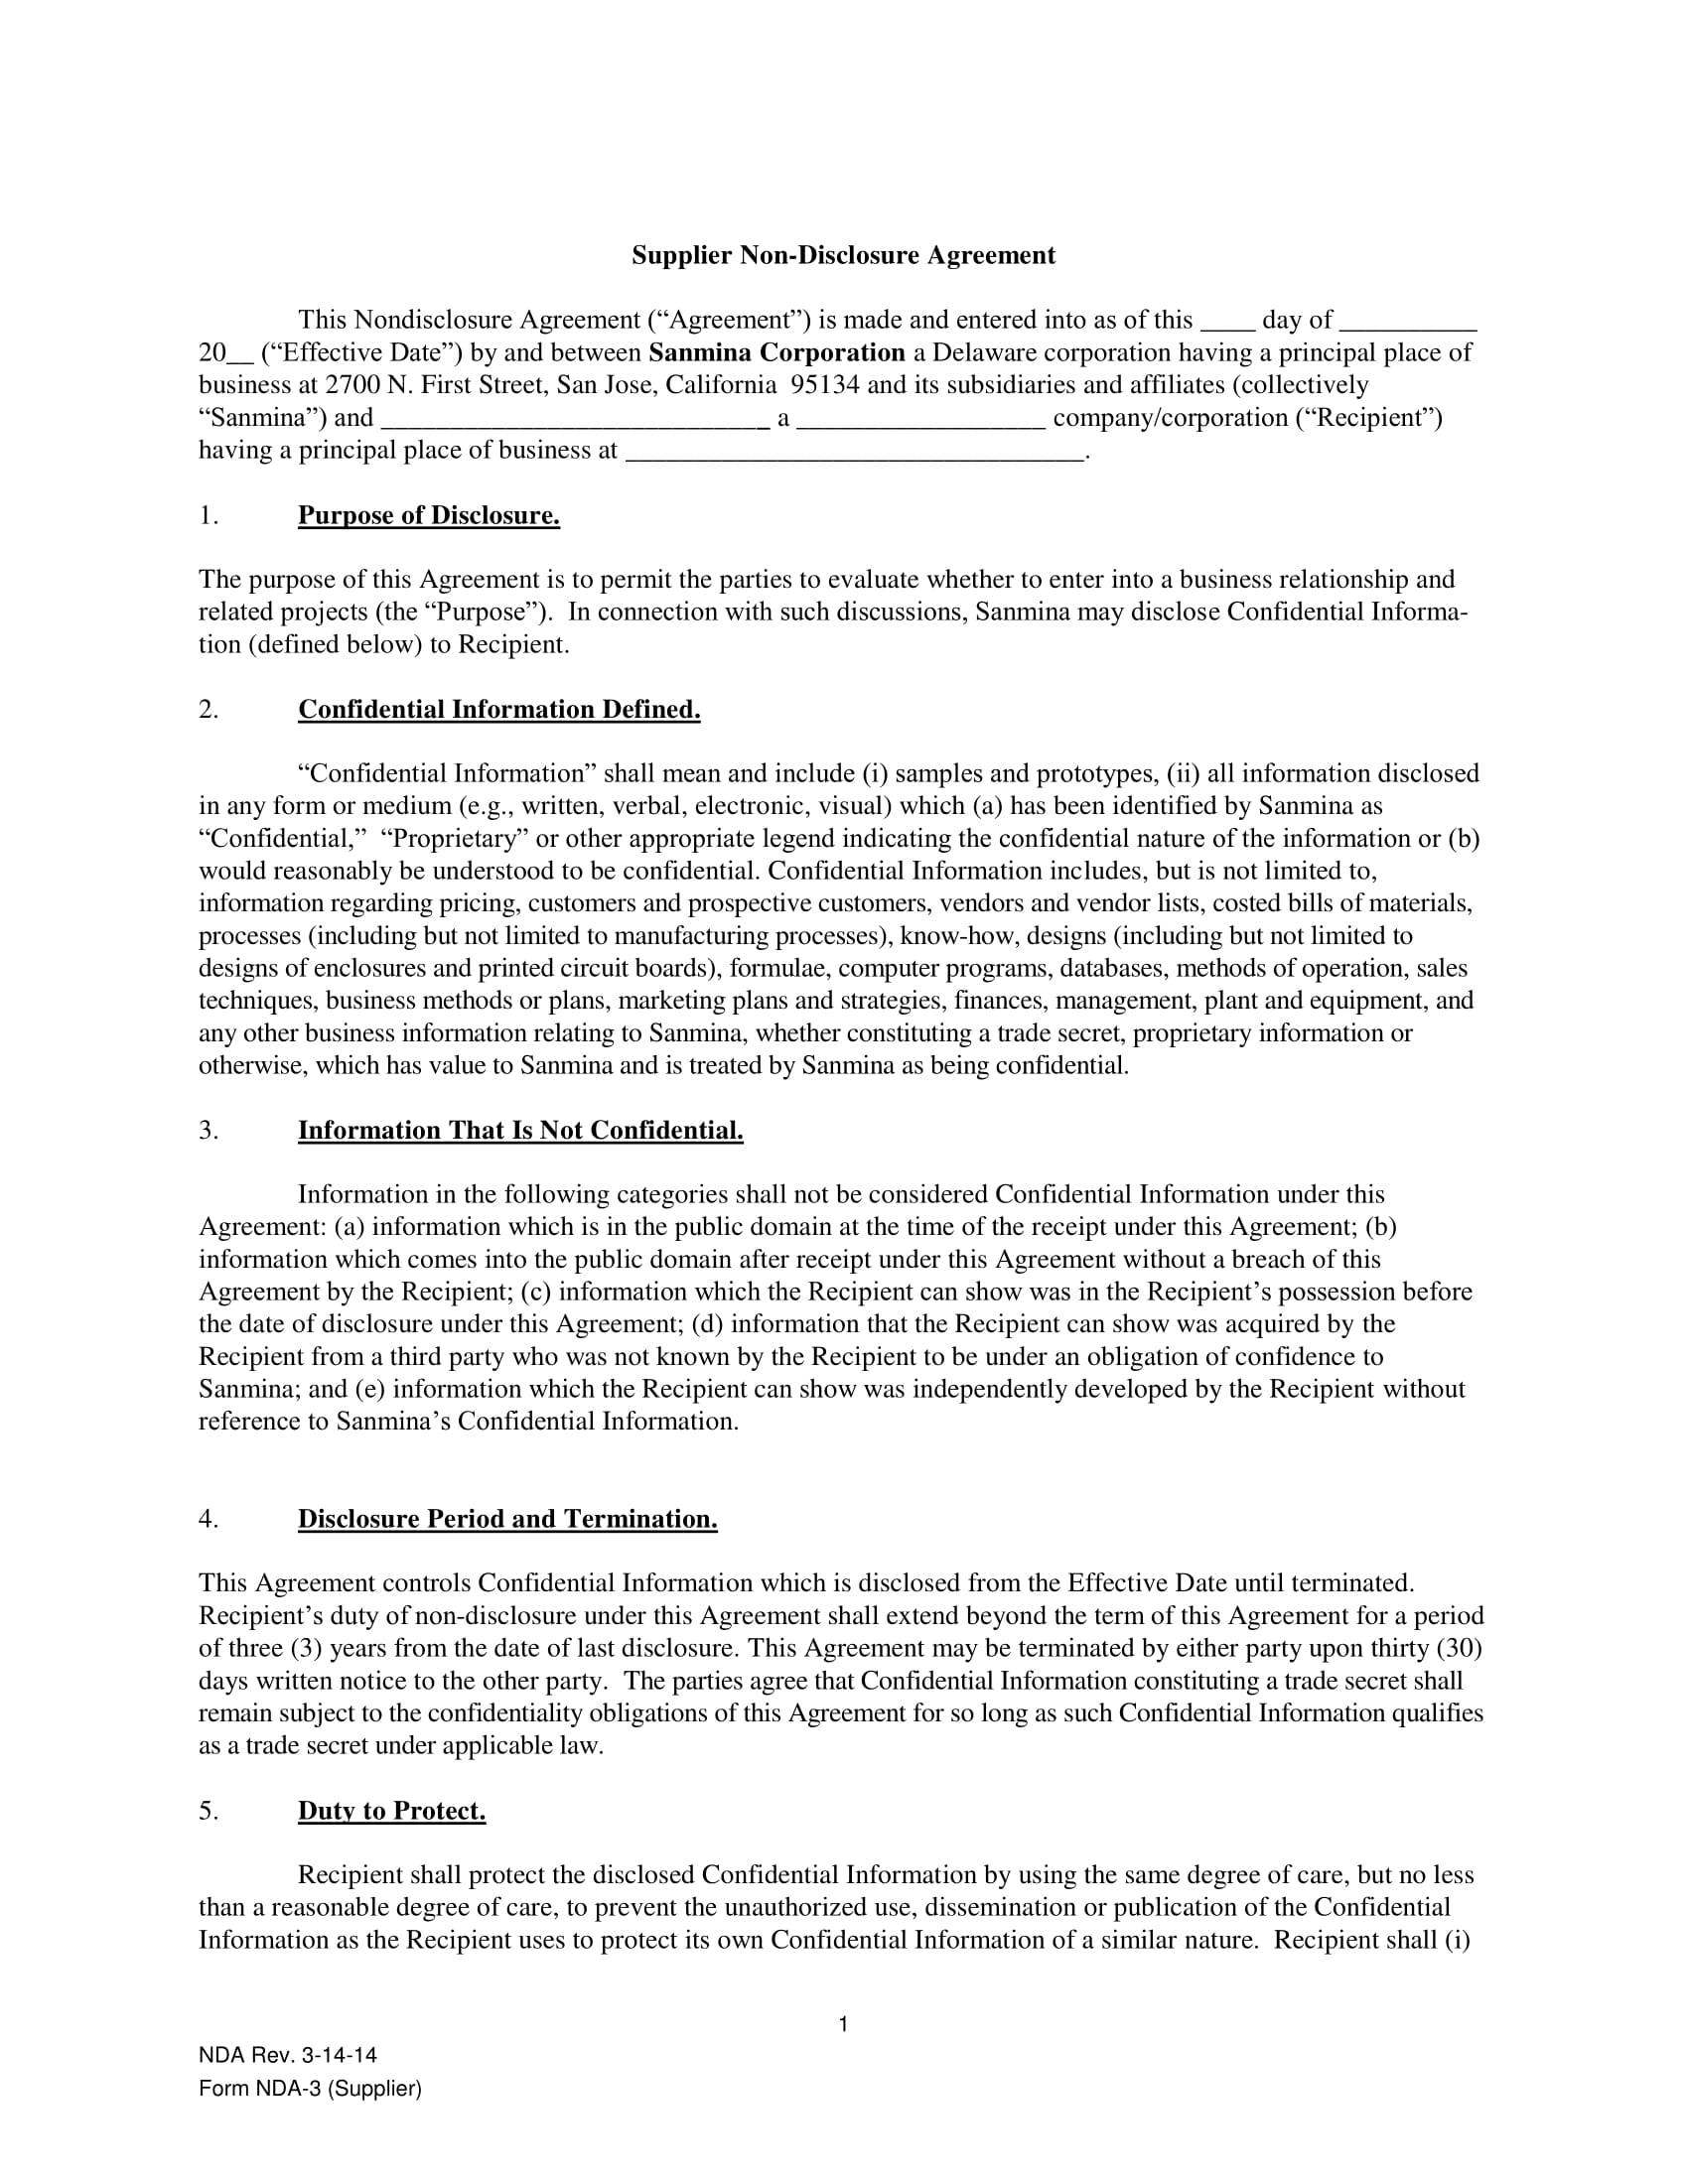 supplier non disclosure agreement contract form 1